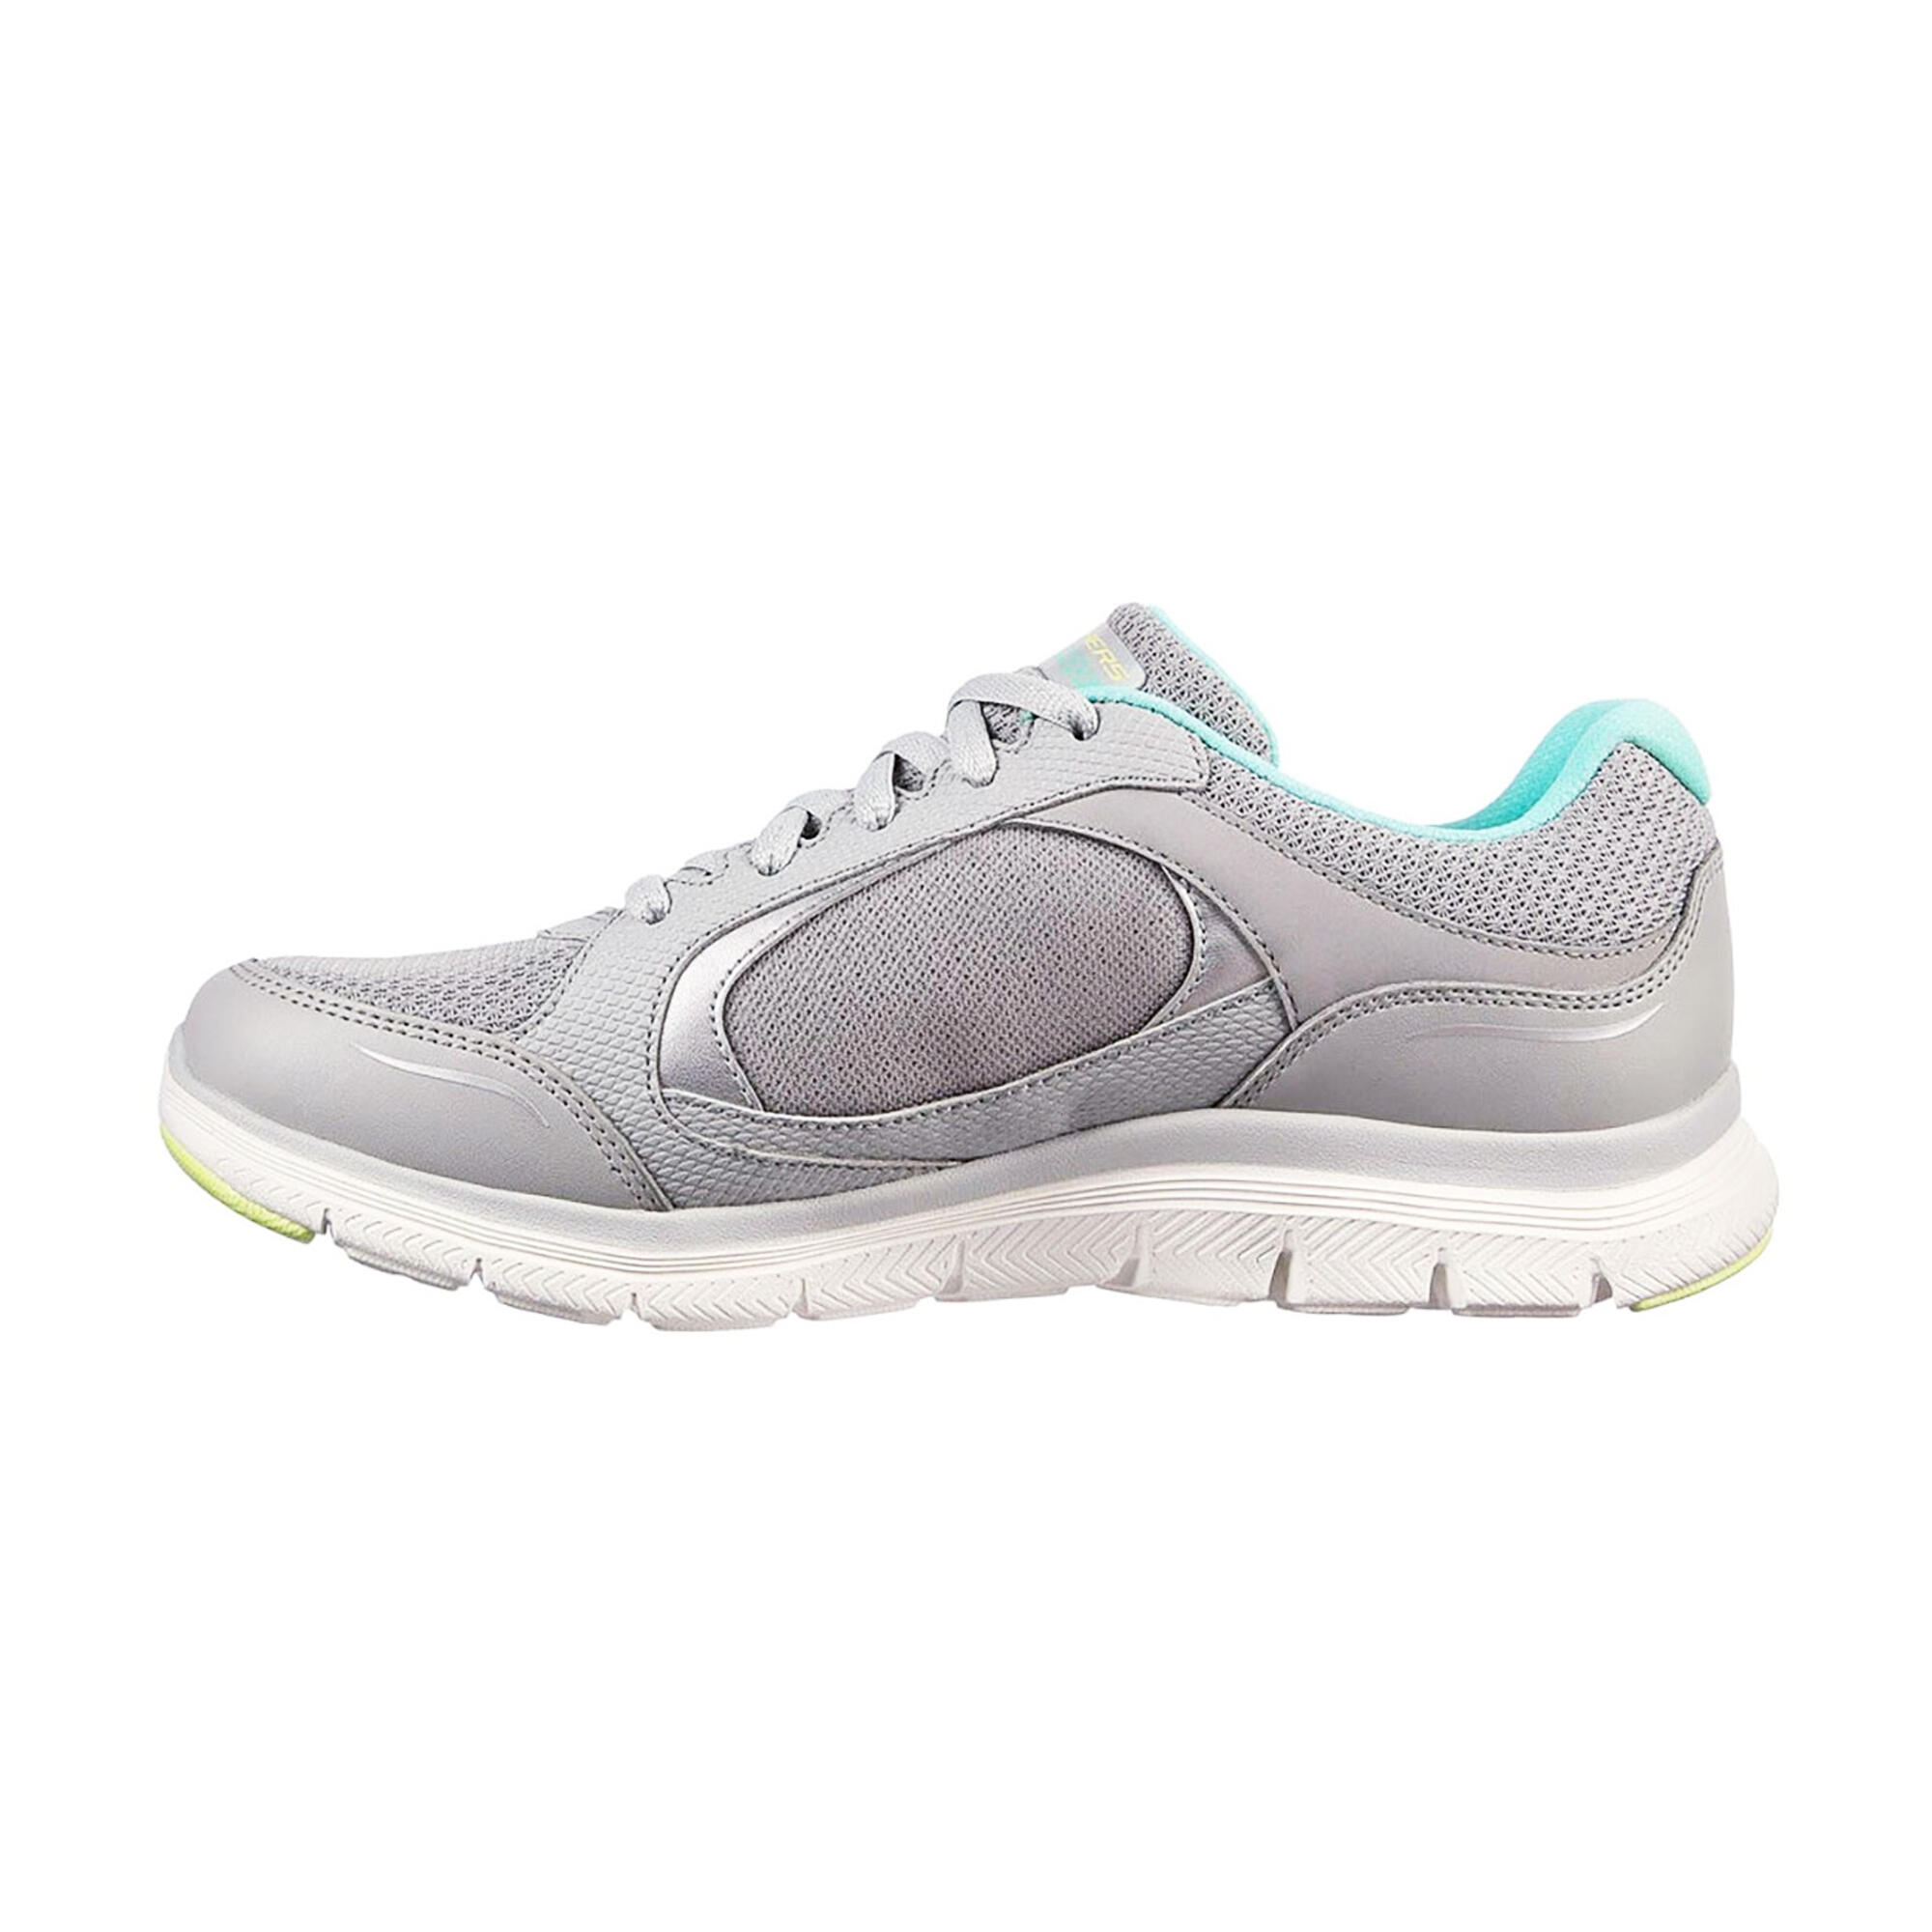 Womens/Ladies Flex Appeal 4.0 True Clarity Trainers (Grey/Turquoise) 2/5